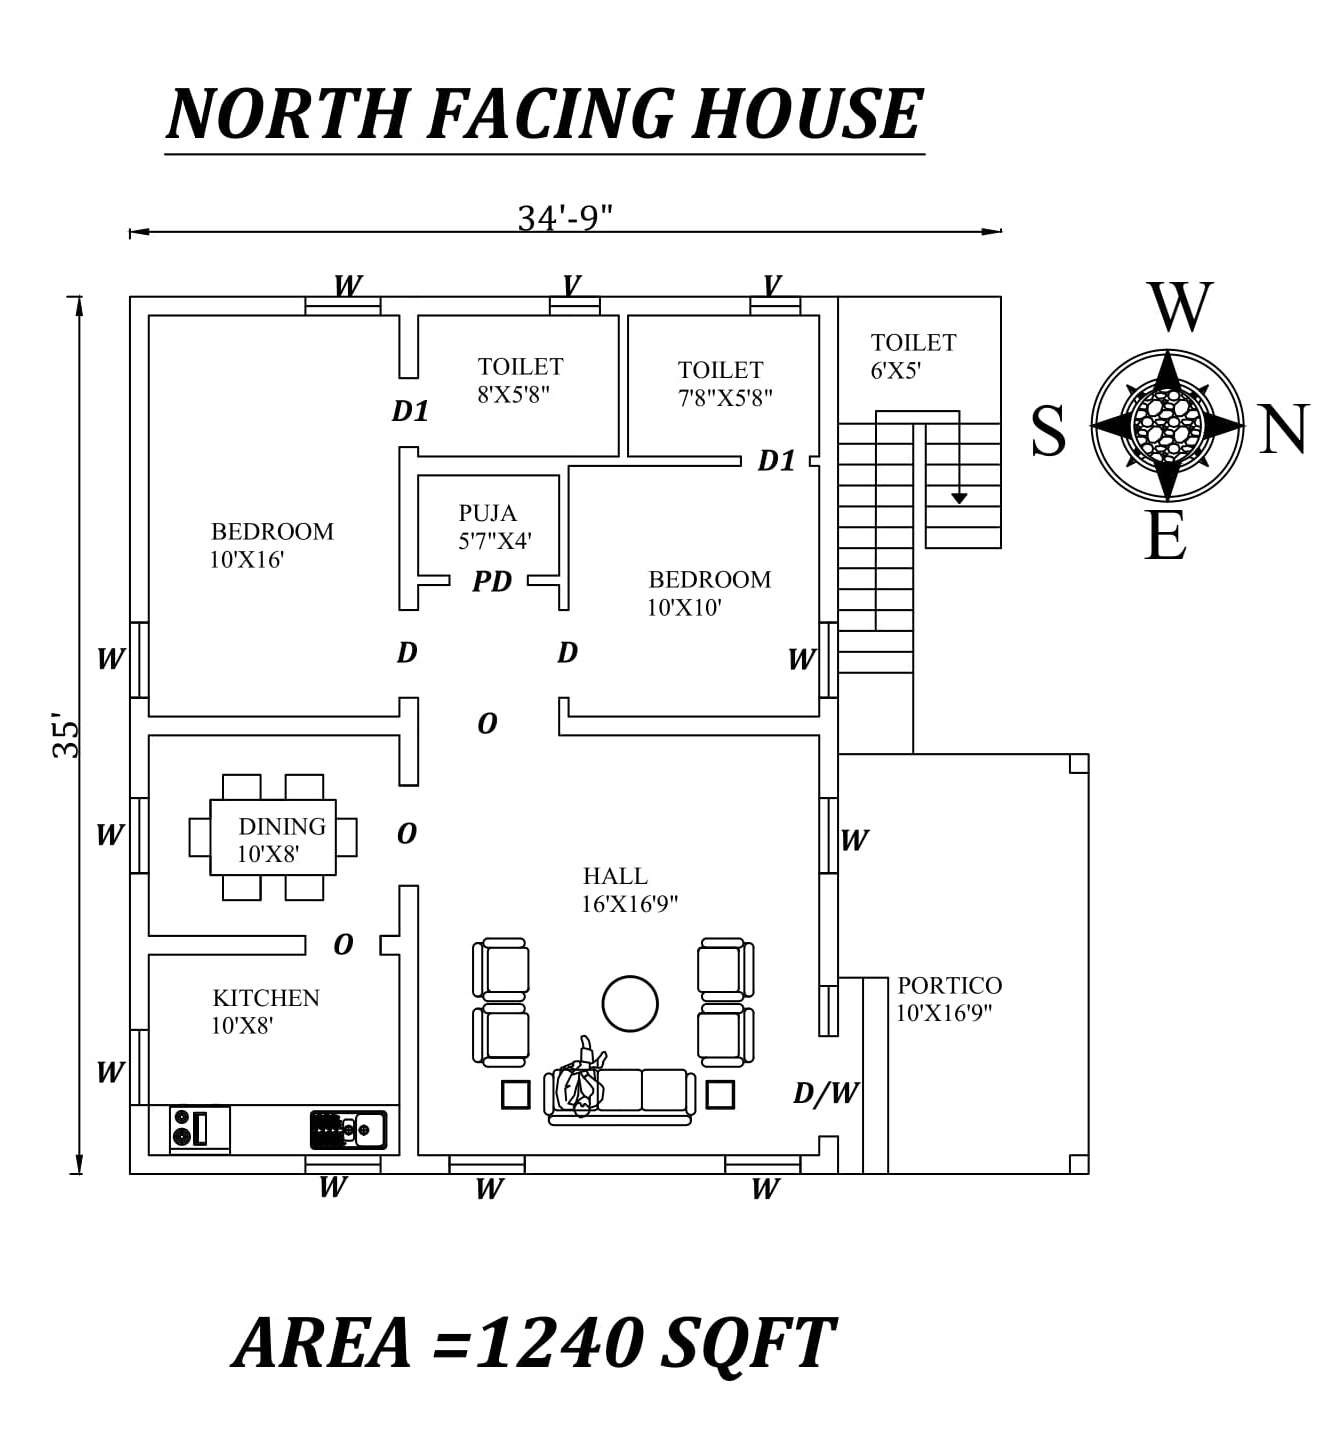 34'9"X35' Awesome Furnished North facing 2bhk house plan as per Vastu